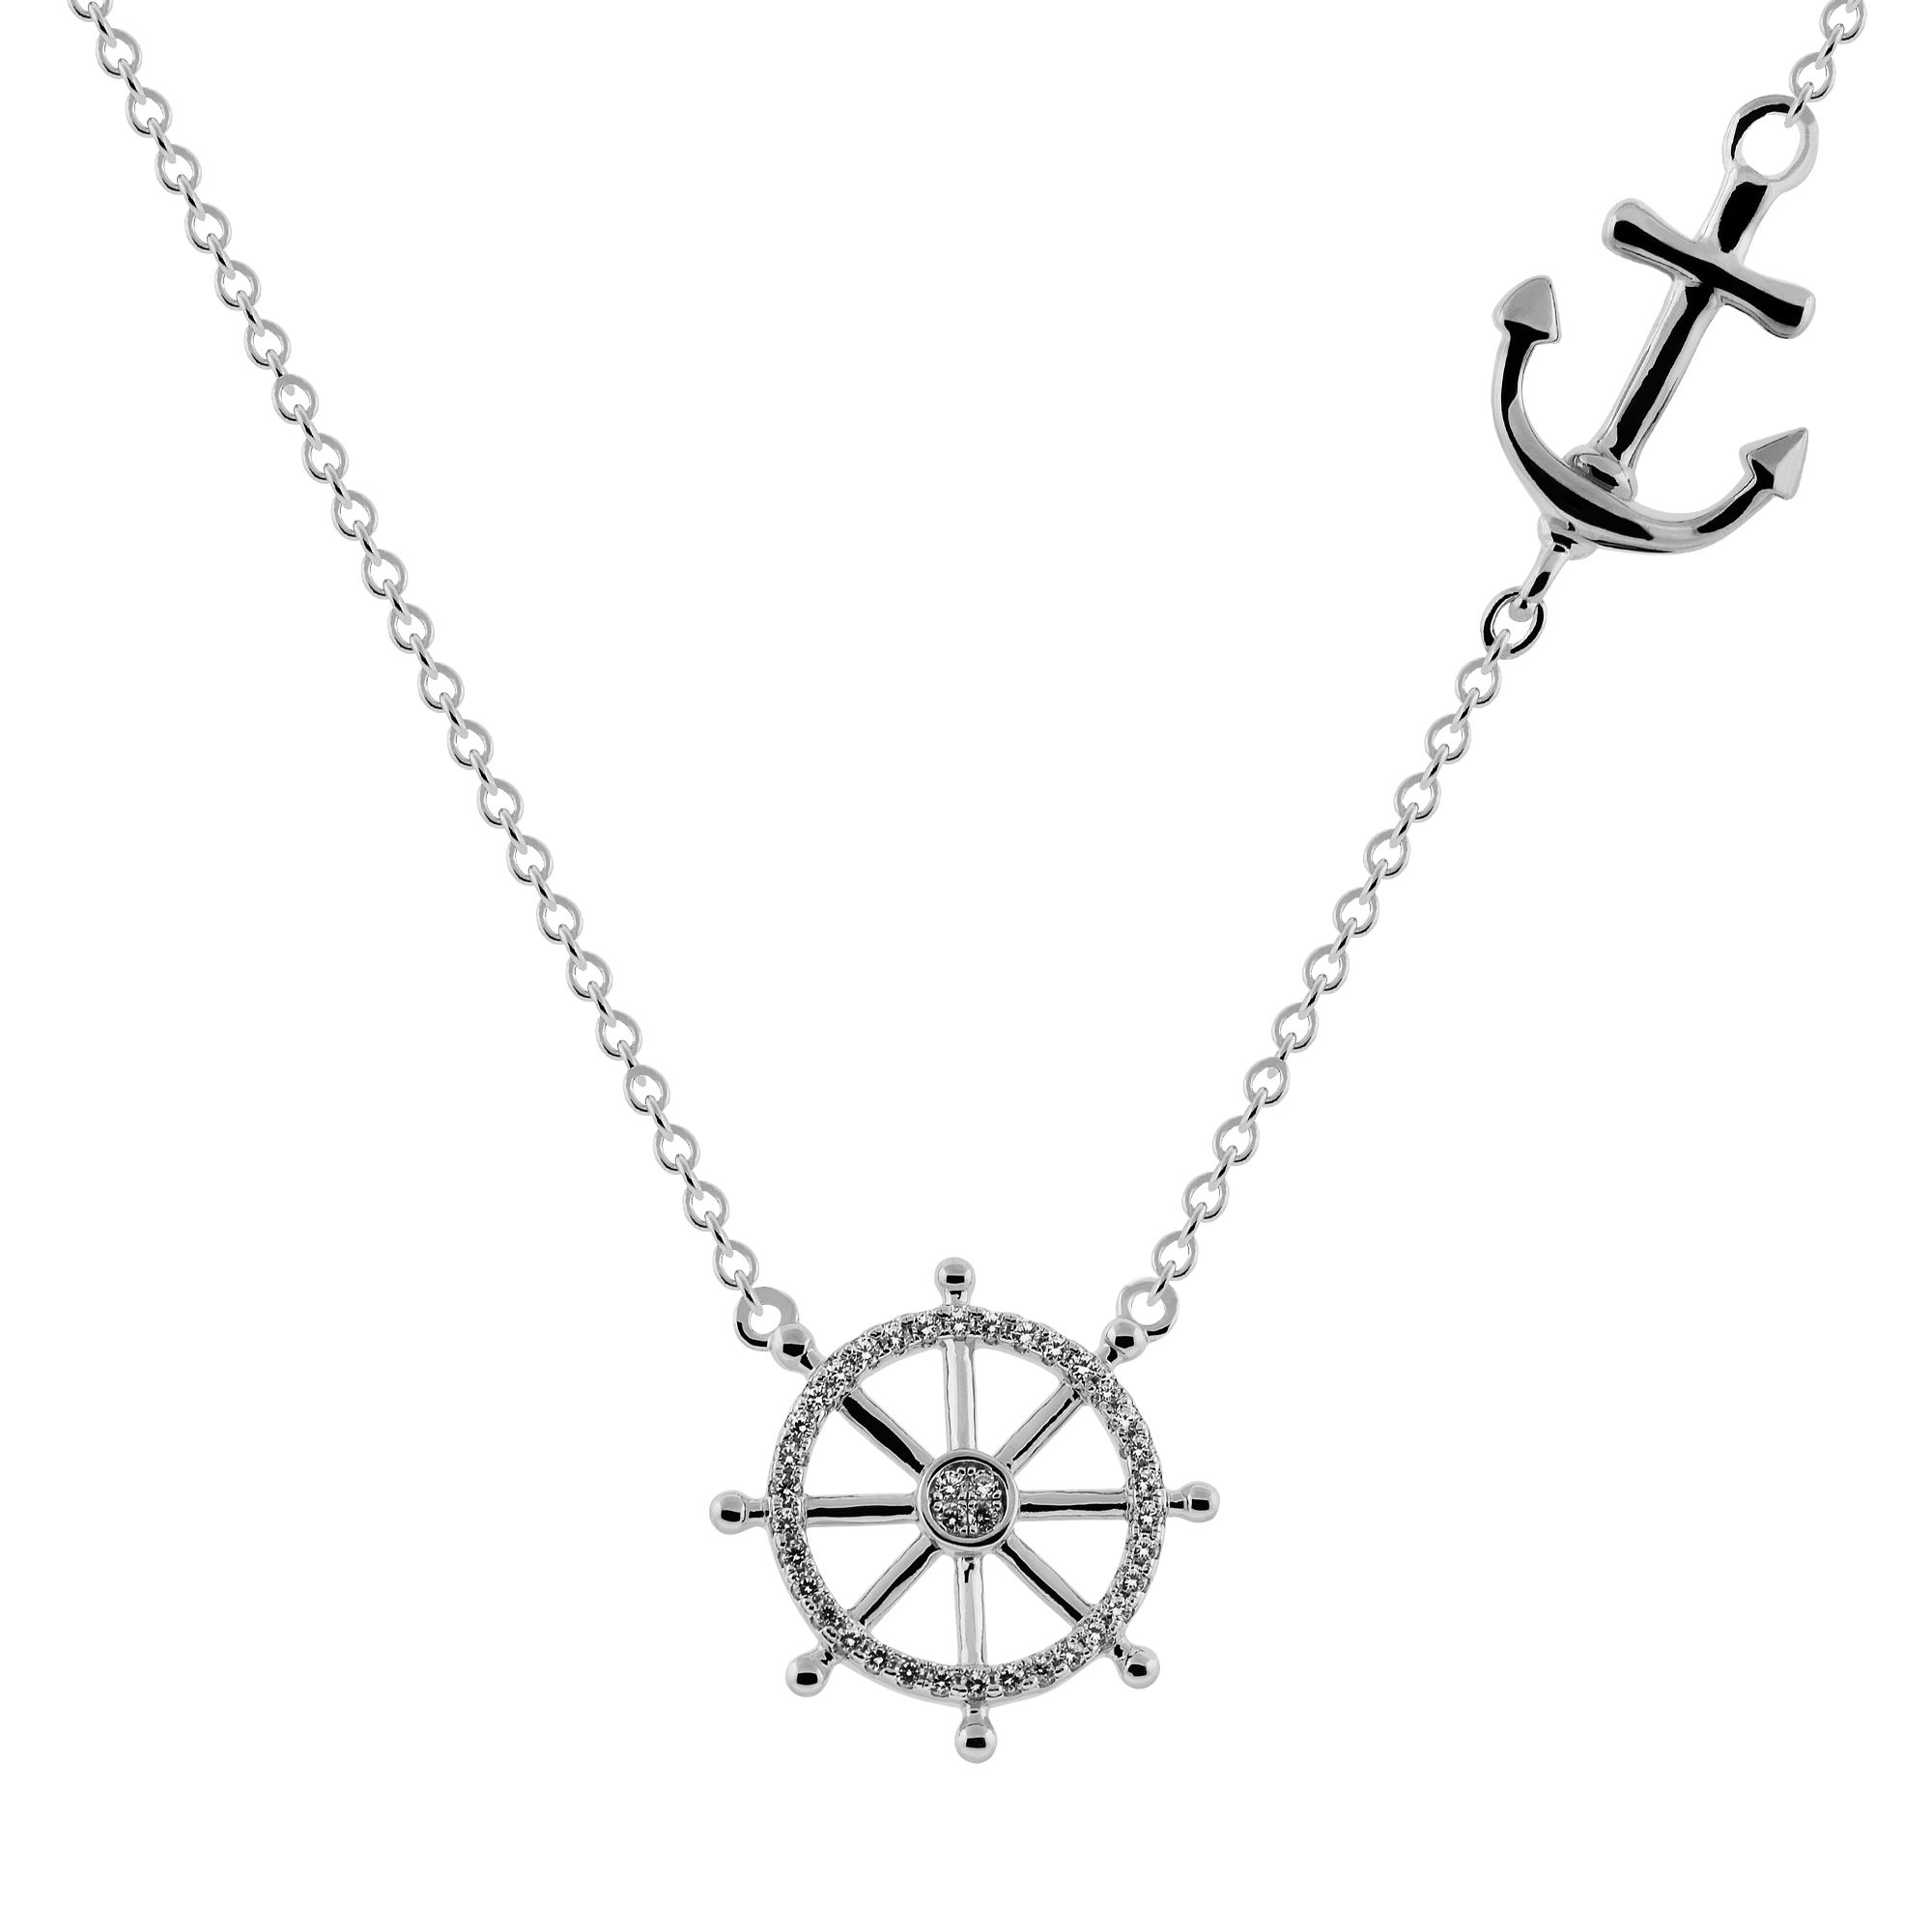 White CZ Steering Wheel & Anchor Hang Tag Charm Necklace